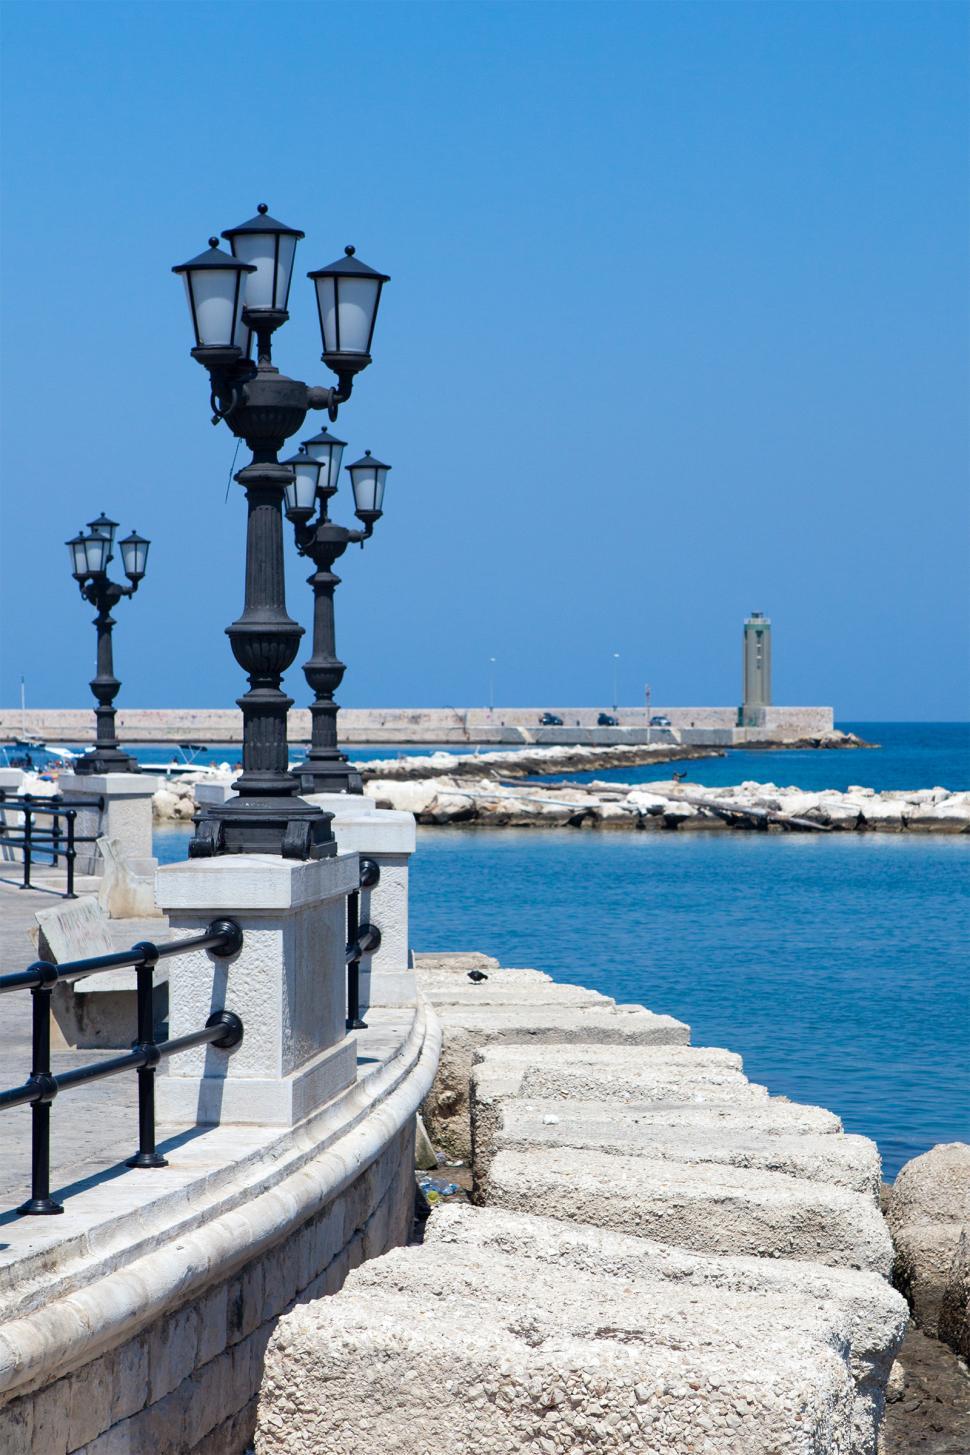 Free Image of Street Lamps And Sea With Blue Sky - Bari, Italy  